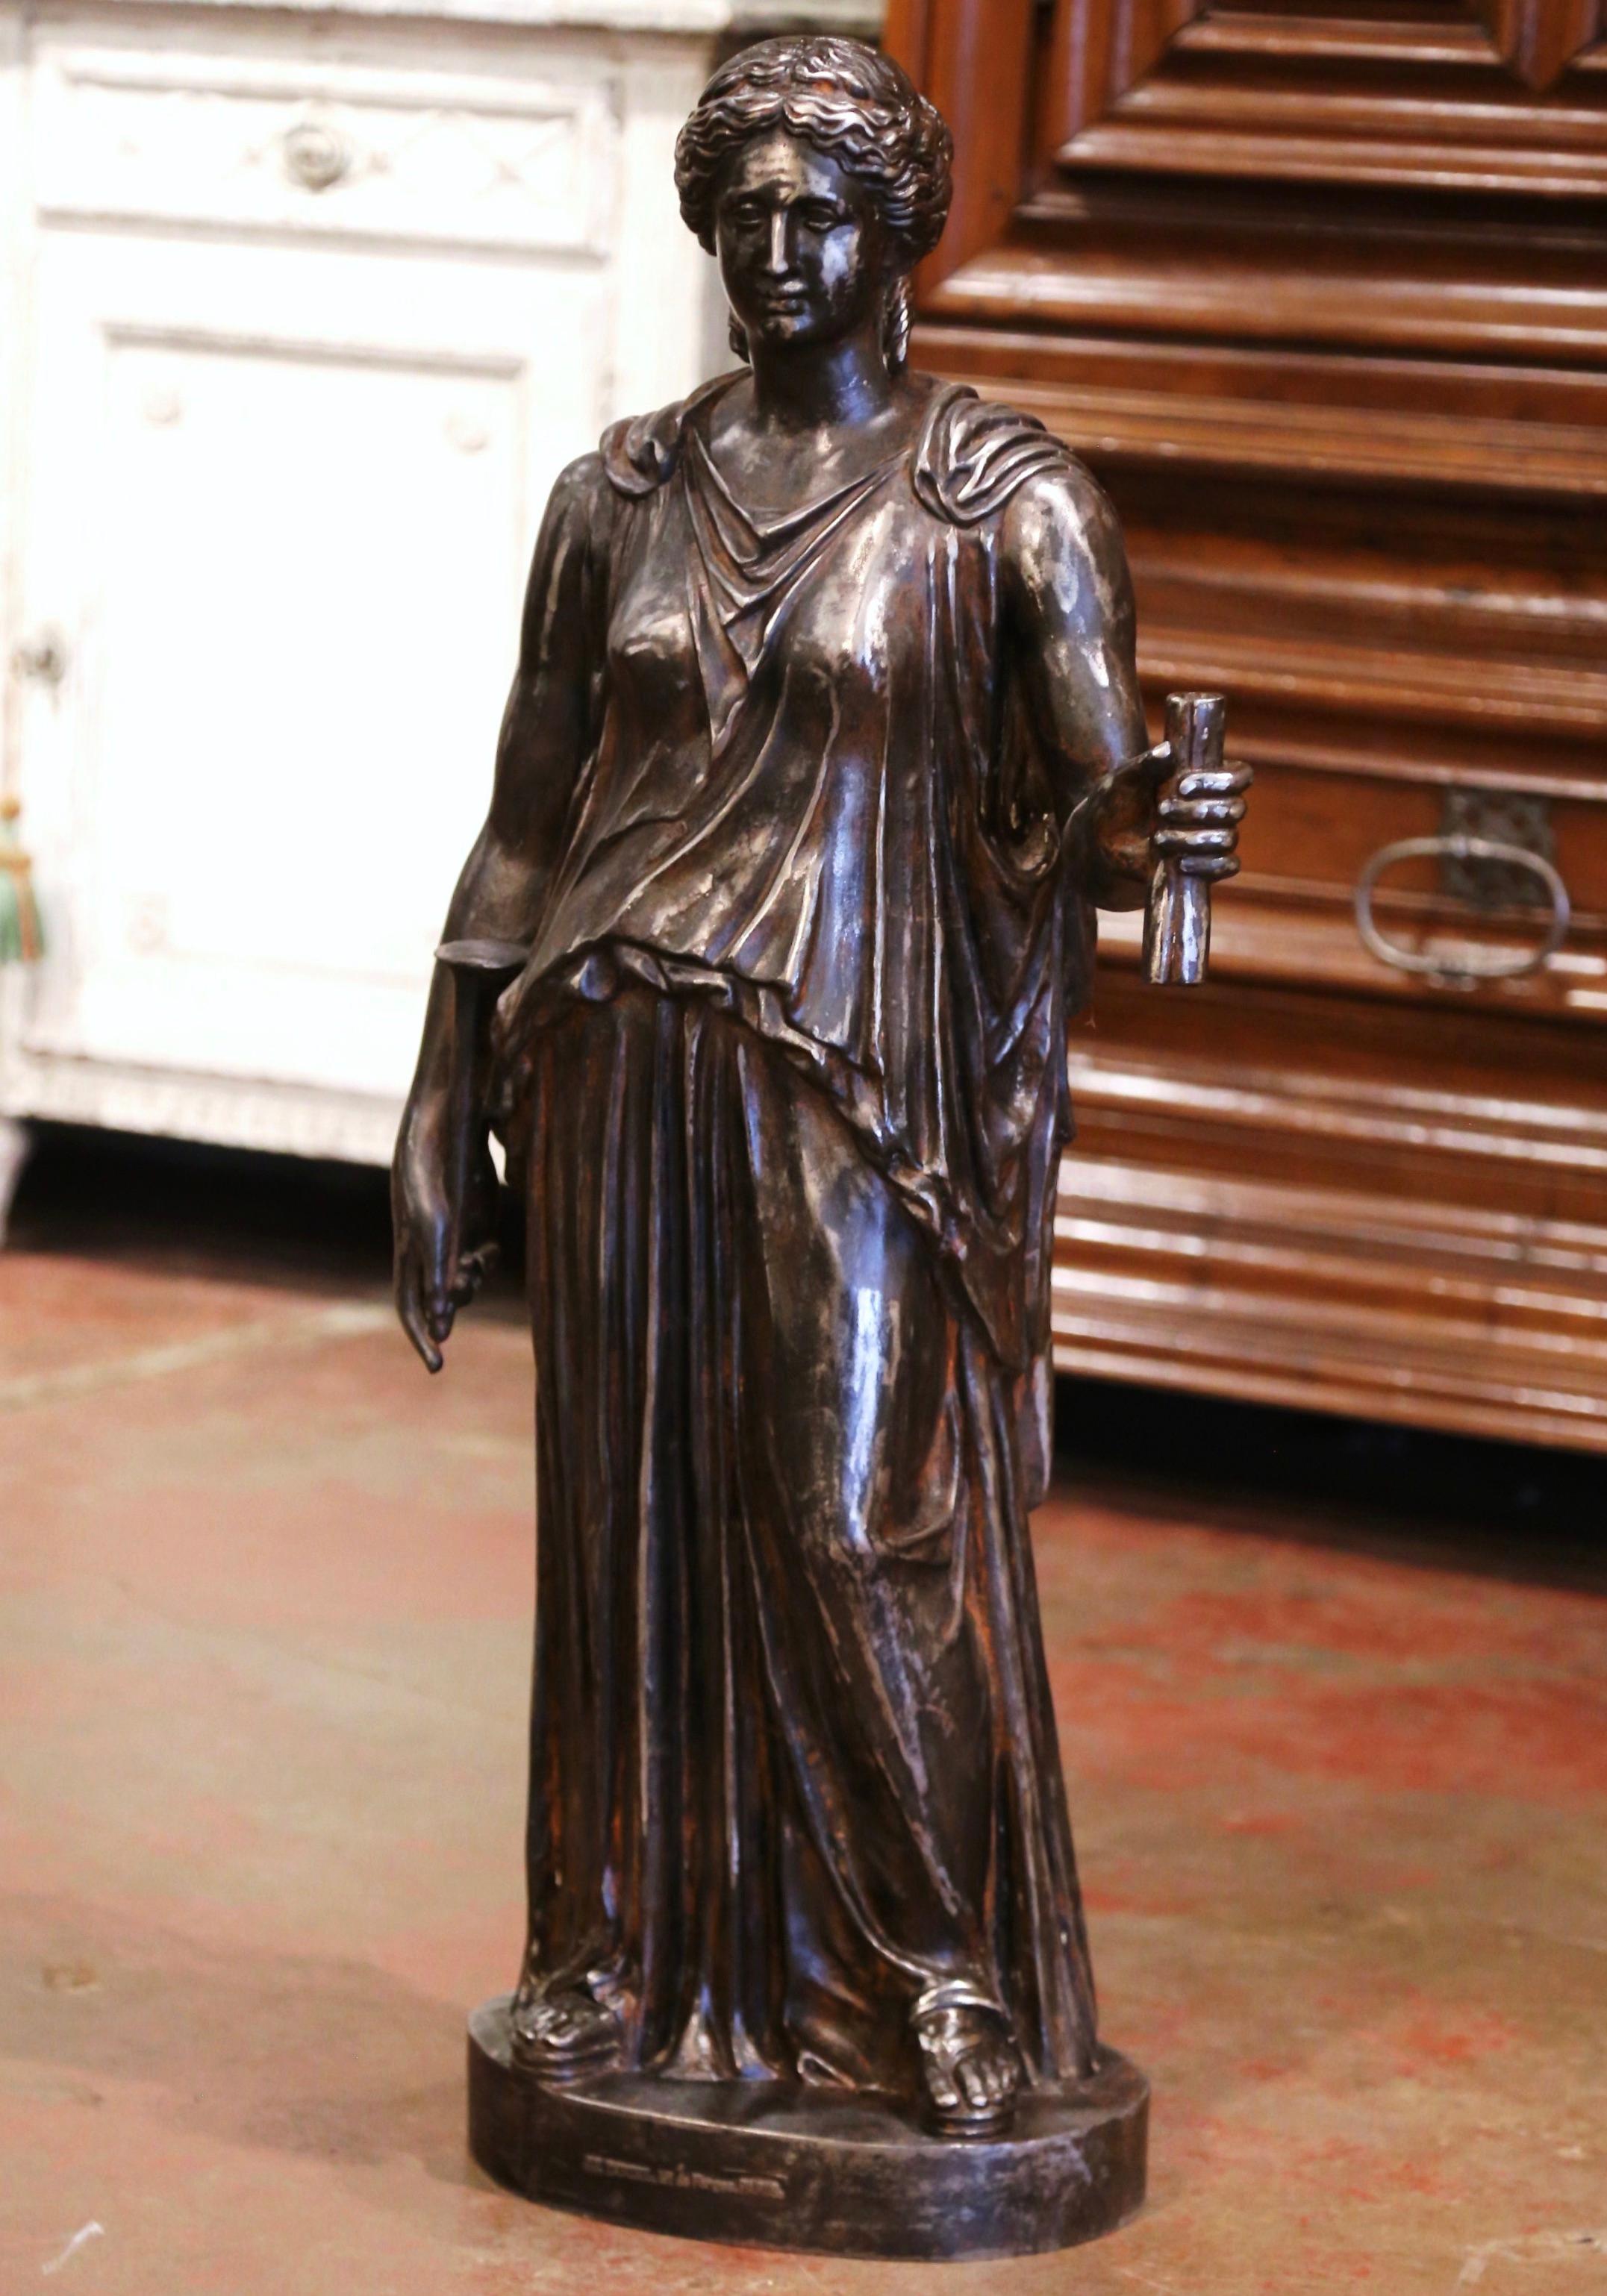 Decorate an entry or a patio with this elegant antique statuary. Crafted in France circa 1850, and made of cast iron, the sculpture depicts a Roman figure in formal clothing holding a torch. The art work is signed on the front base by the artist,